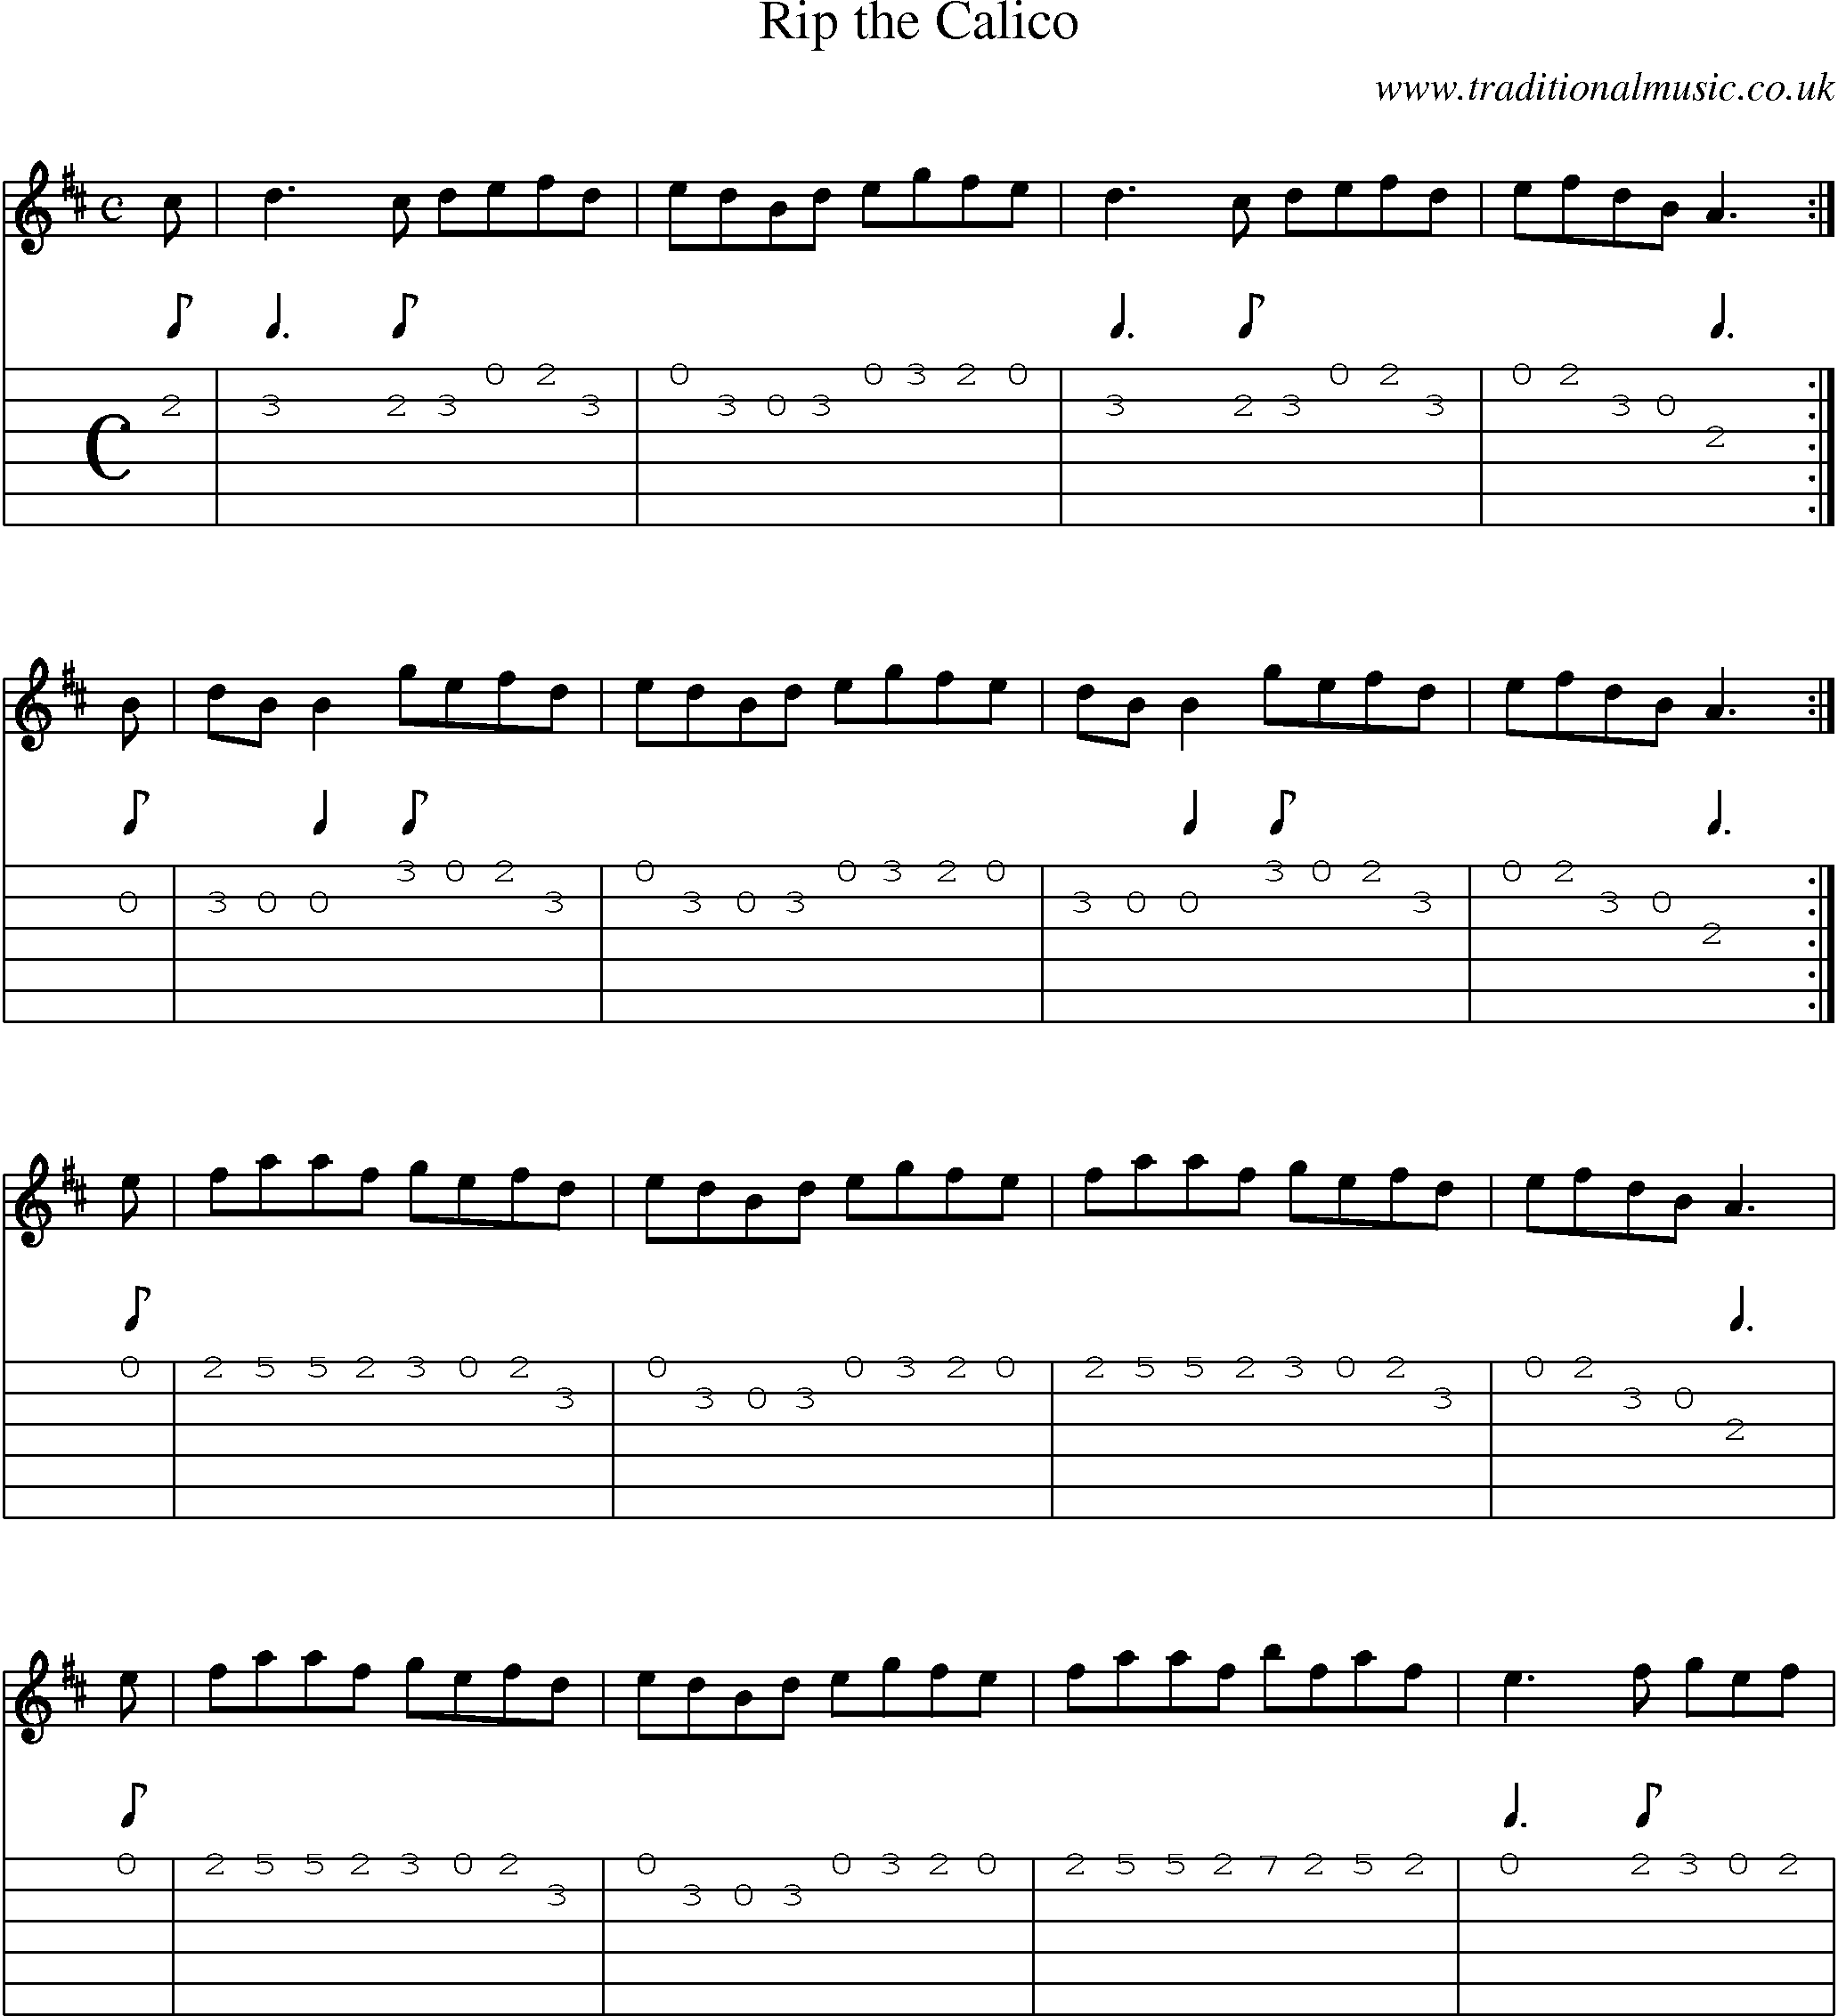 Music Score and Guitar Tabs for Rip Calico